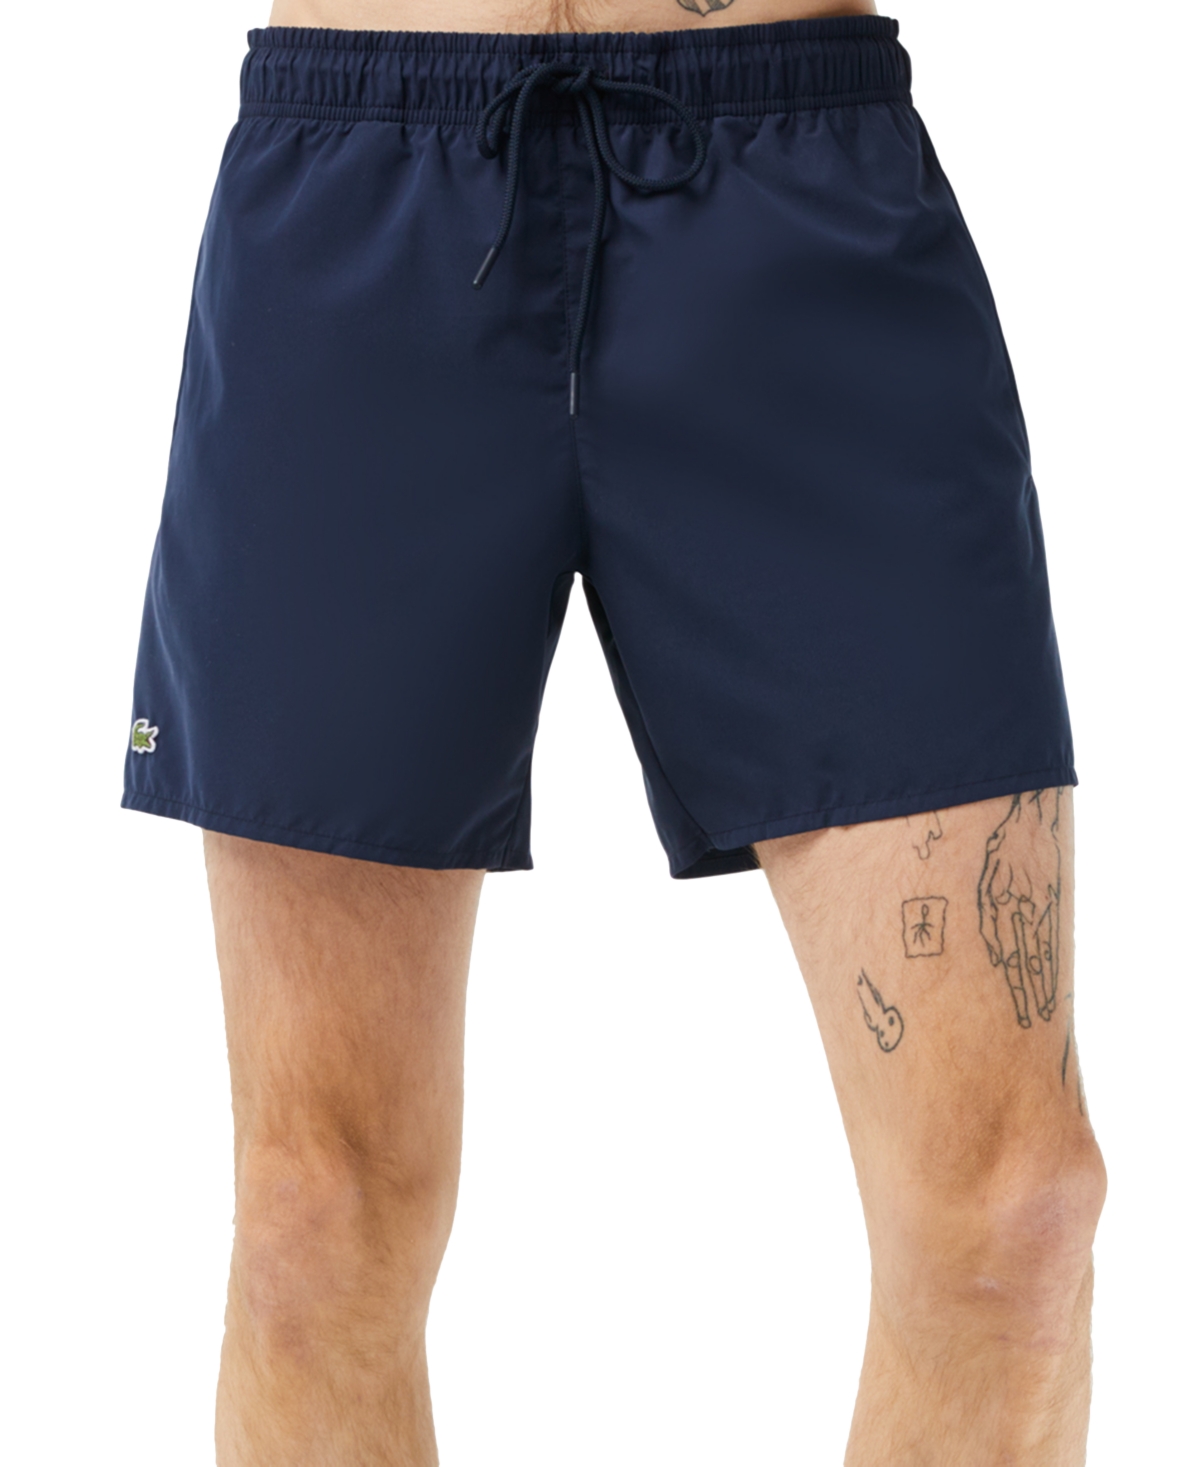 Lacoste Light Quick Dry Swim Shorts Mh6270 In Navy Blue/green 802